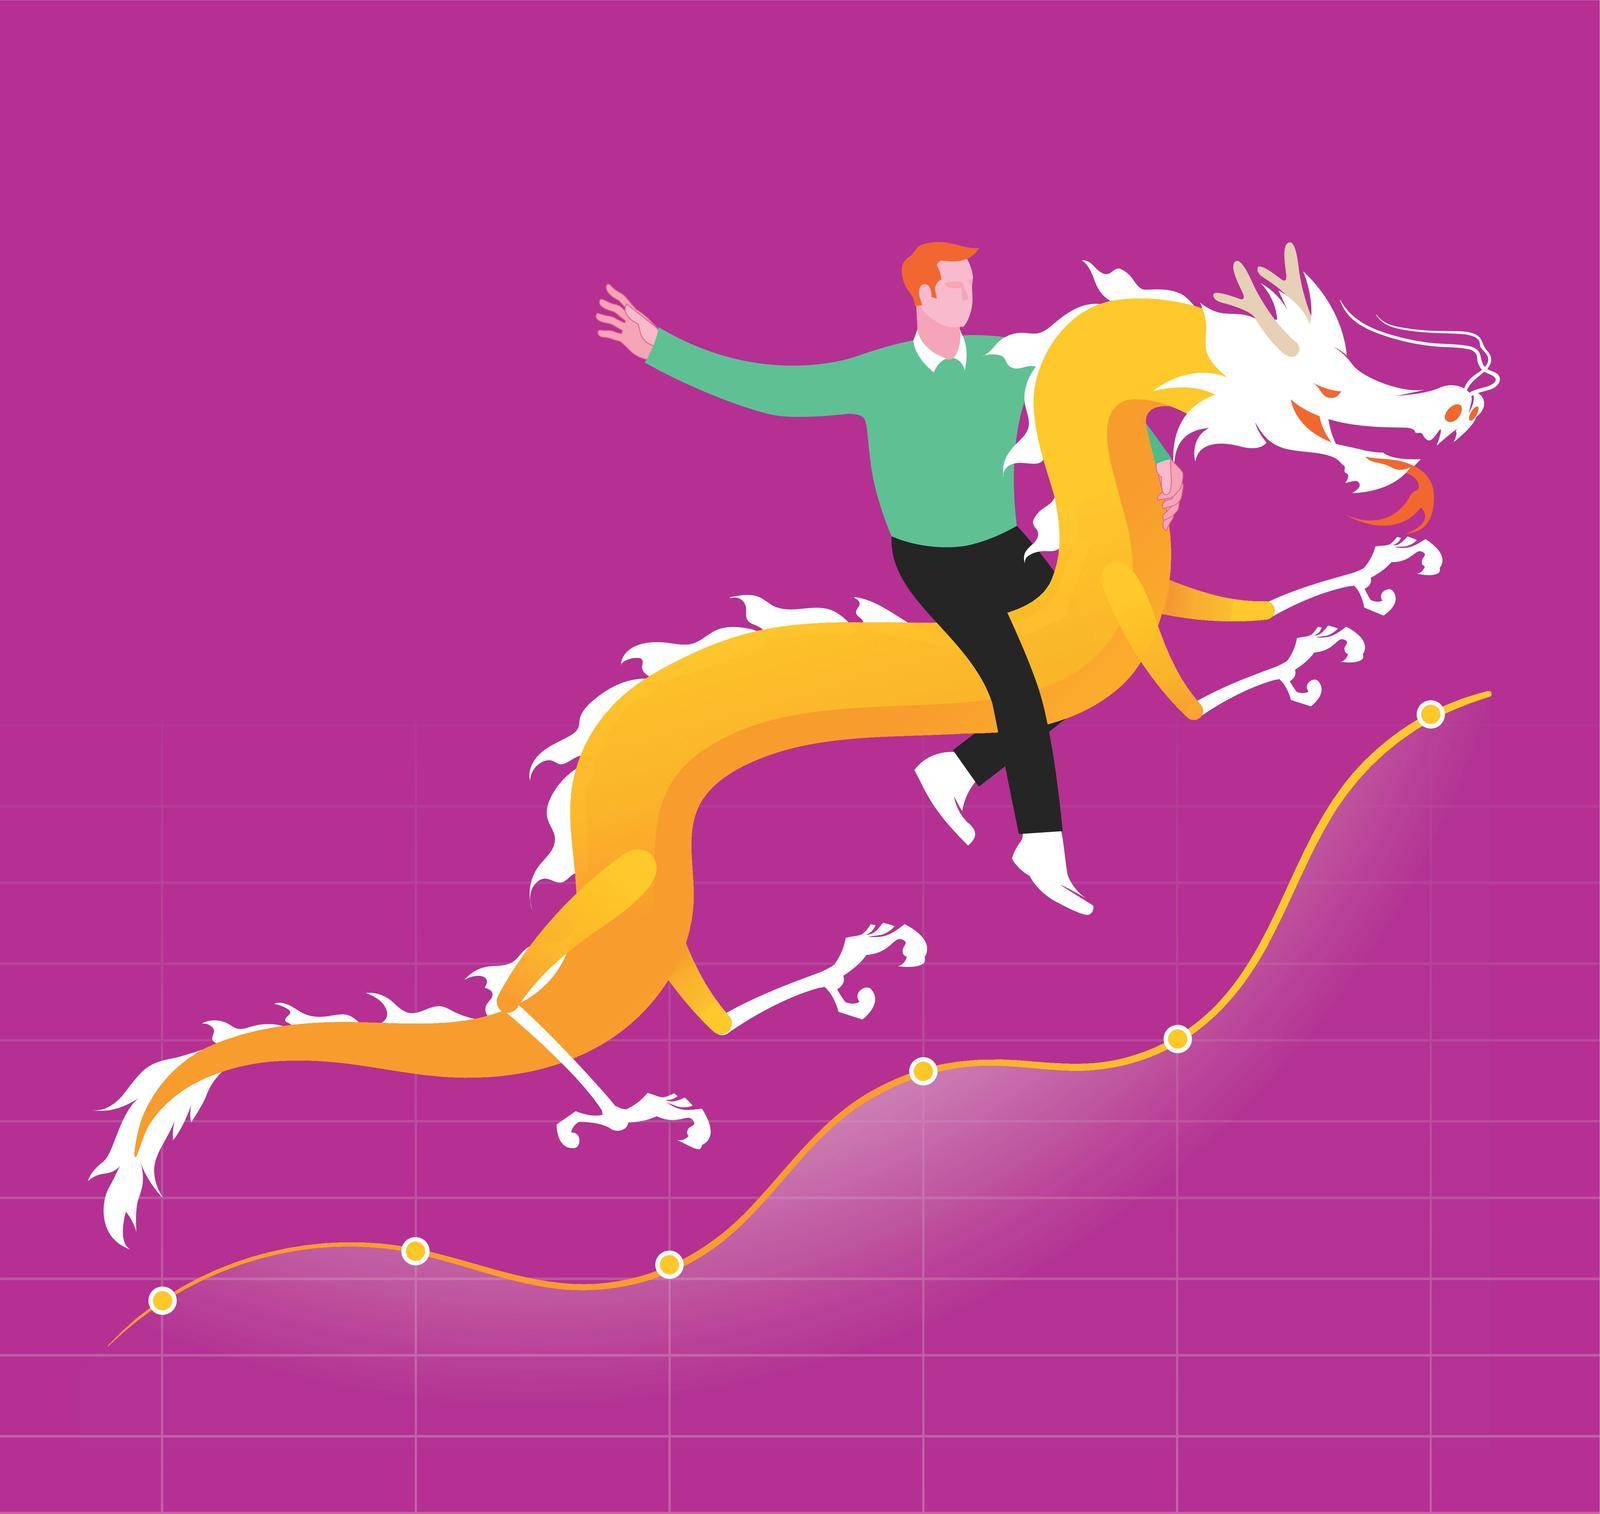 Riding the yellow dragon. Business and economy metaphor. Vector illustration.